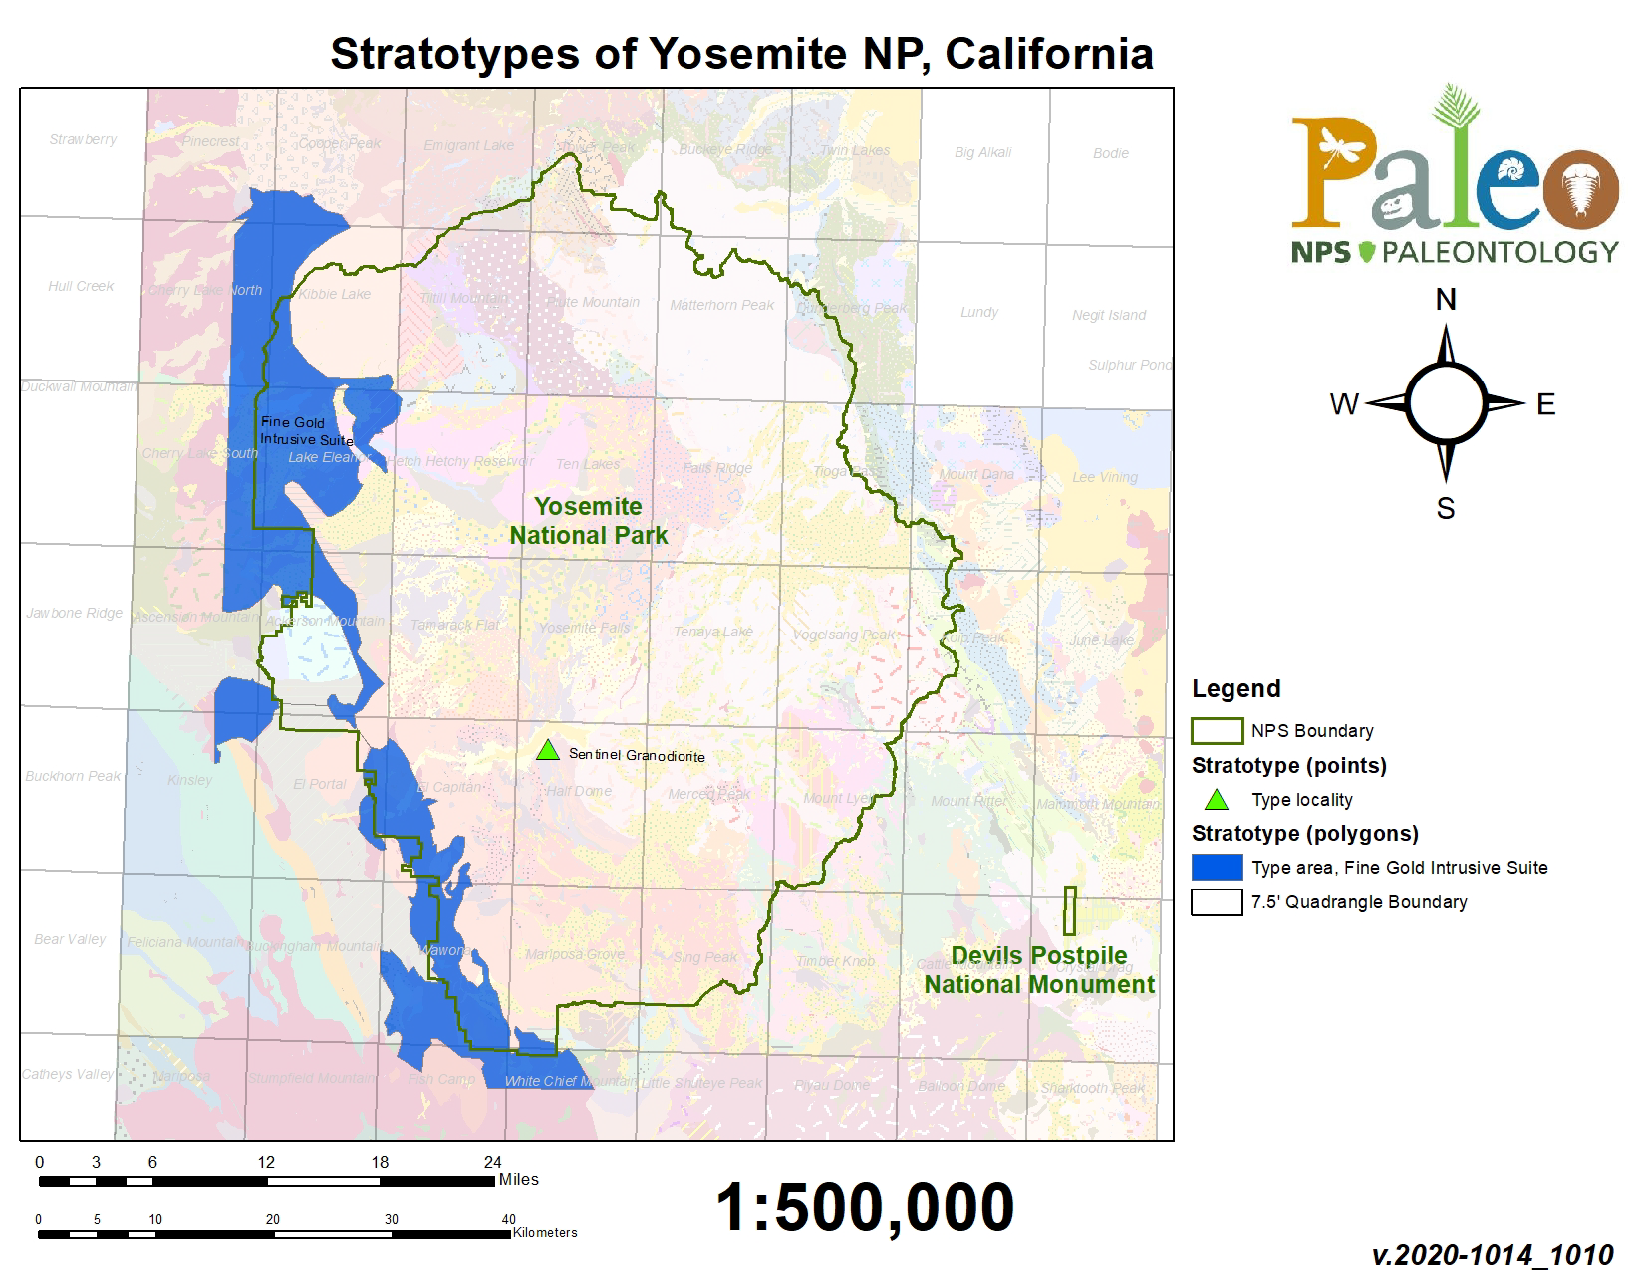 Geologic map of Yosemite overlain with stratotype locations - one type locality iand one type area, mapped along the west boundary of type park.